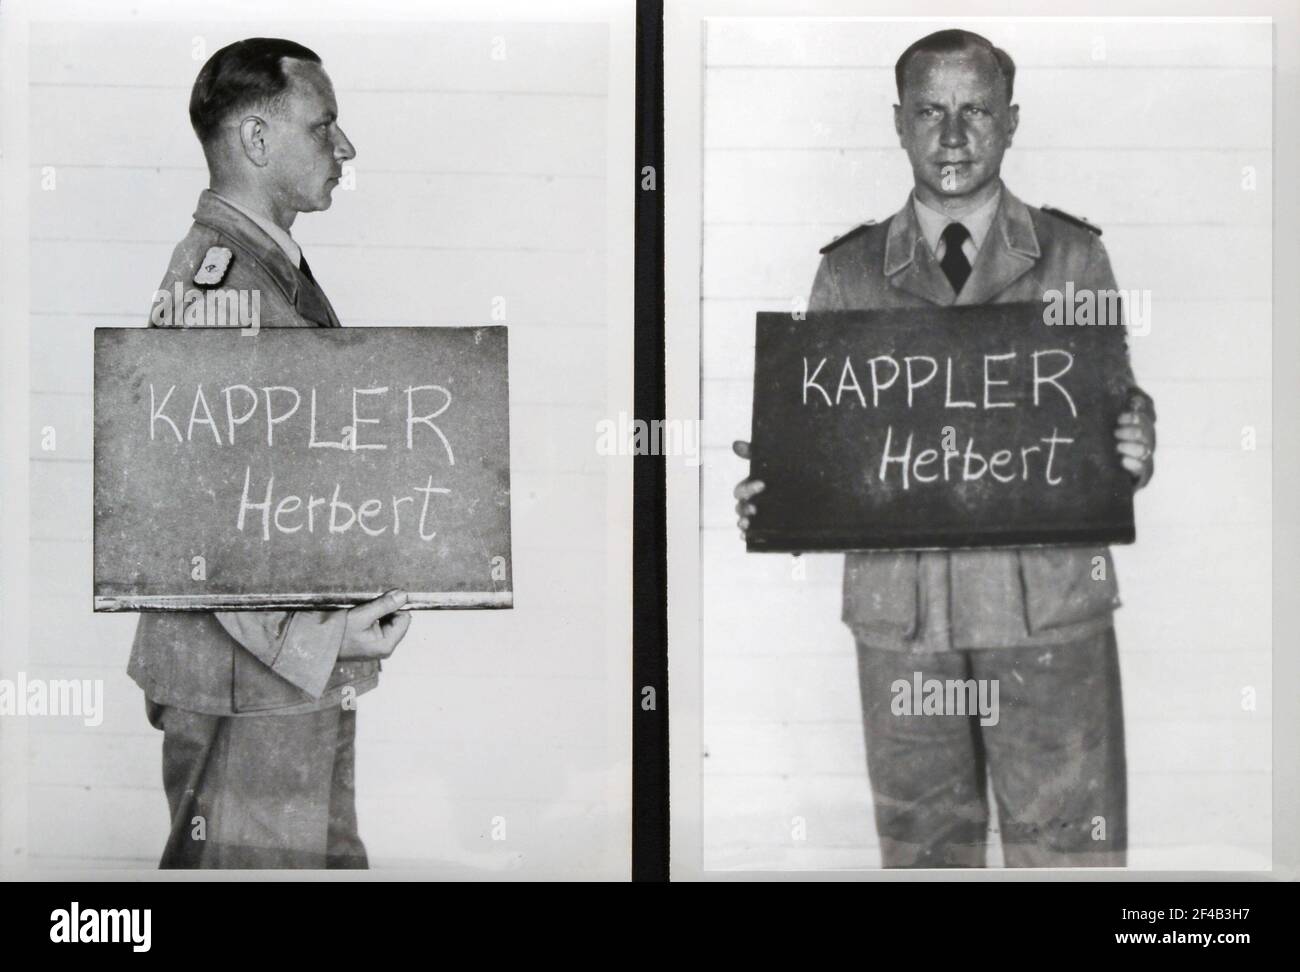 Nazi War Criminal and SS Officer Herbert Kappler, photo taken by the Allies on May 9, 1945 in Italy Stock Photo